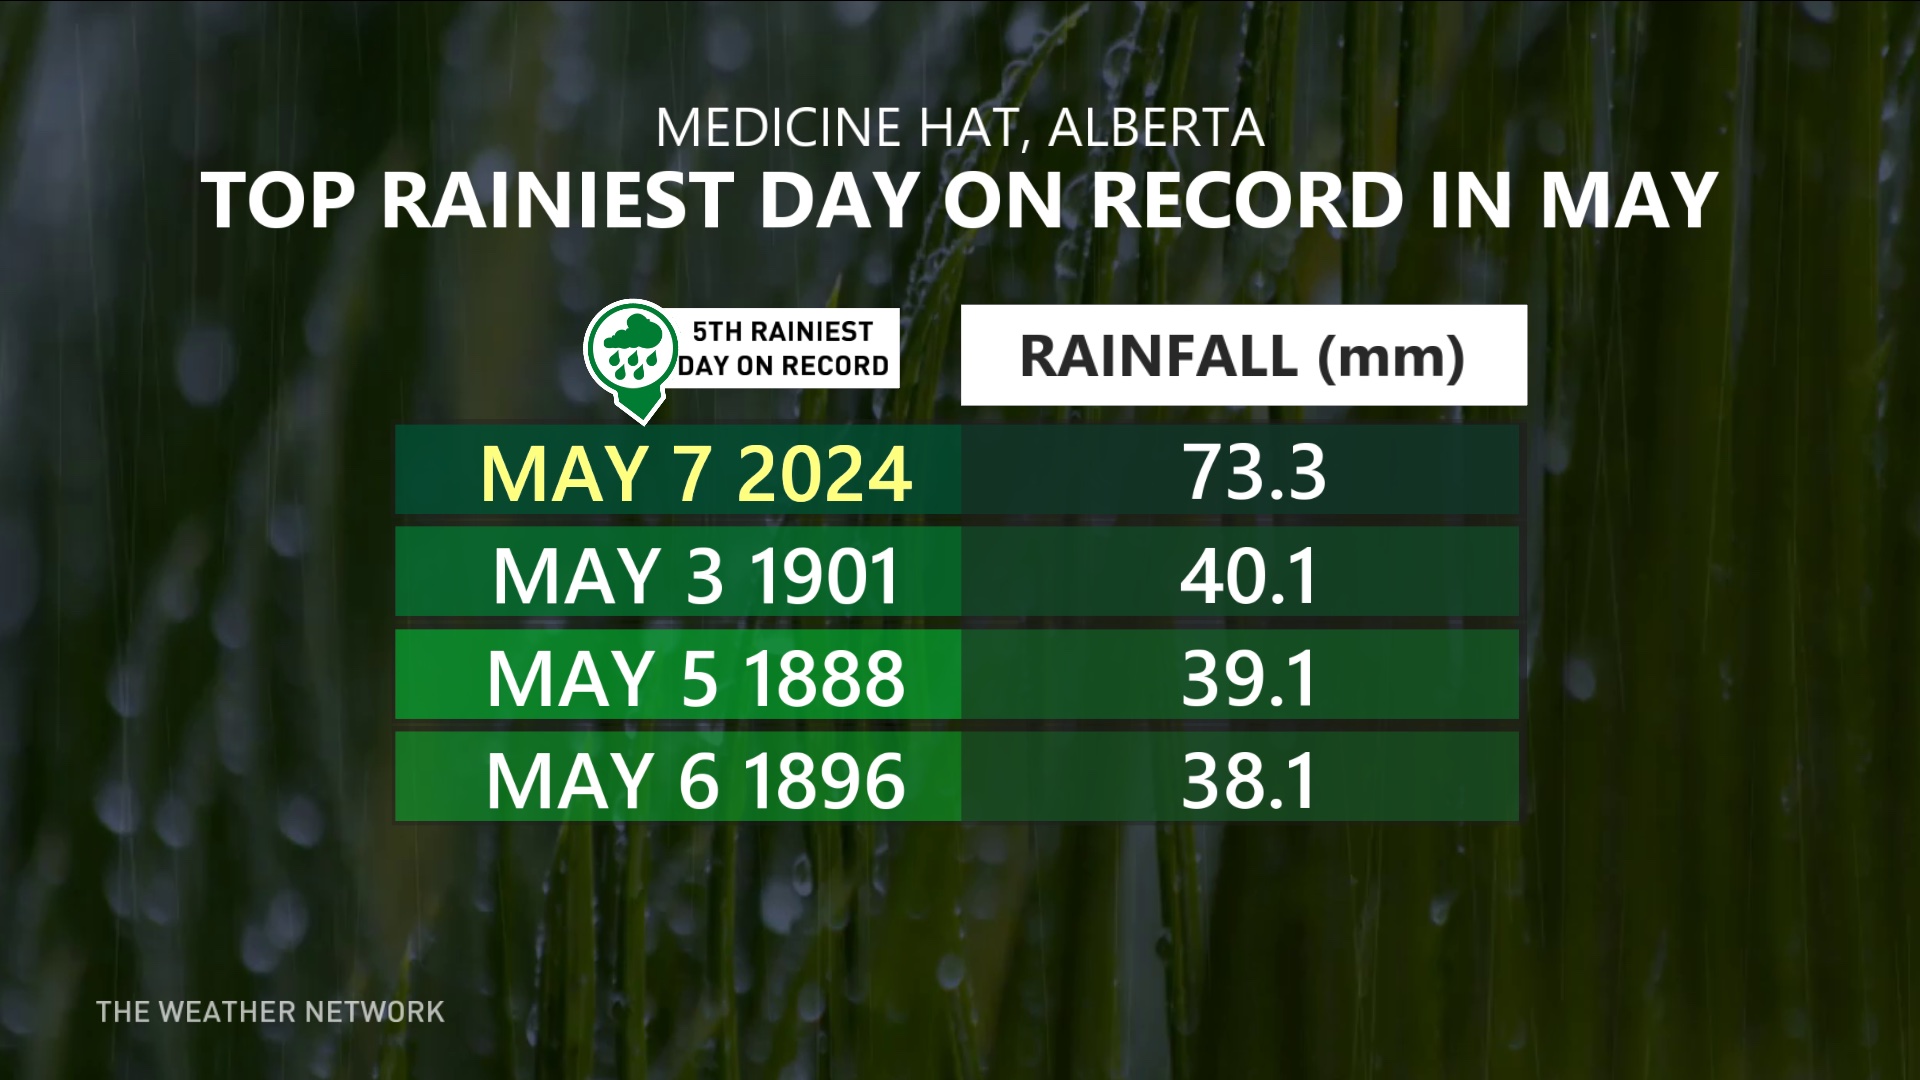 relief, at last: why alberta welcomes 80 mm of rainfall this week